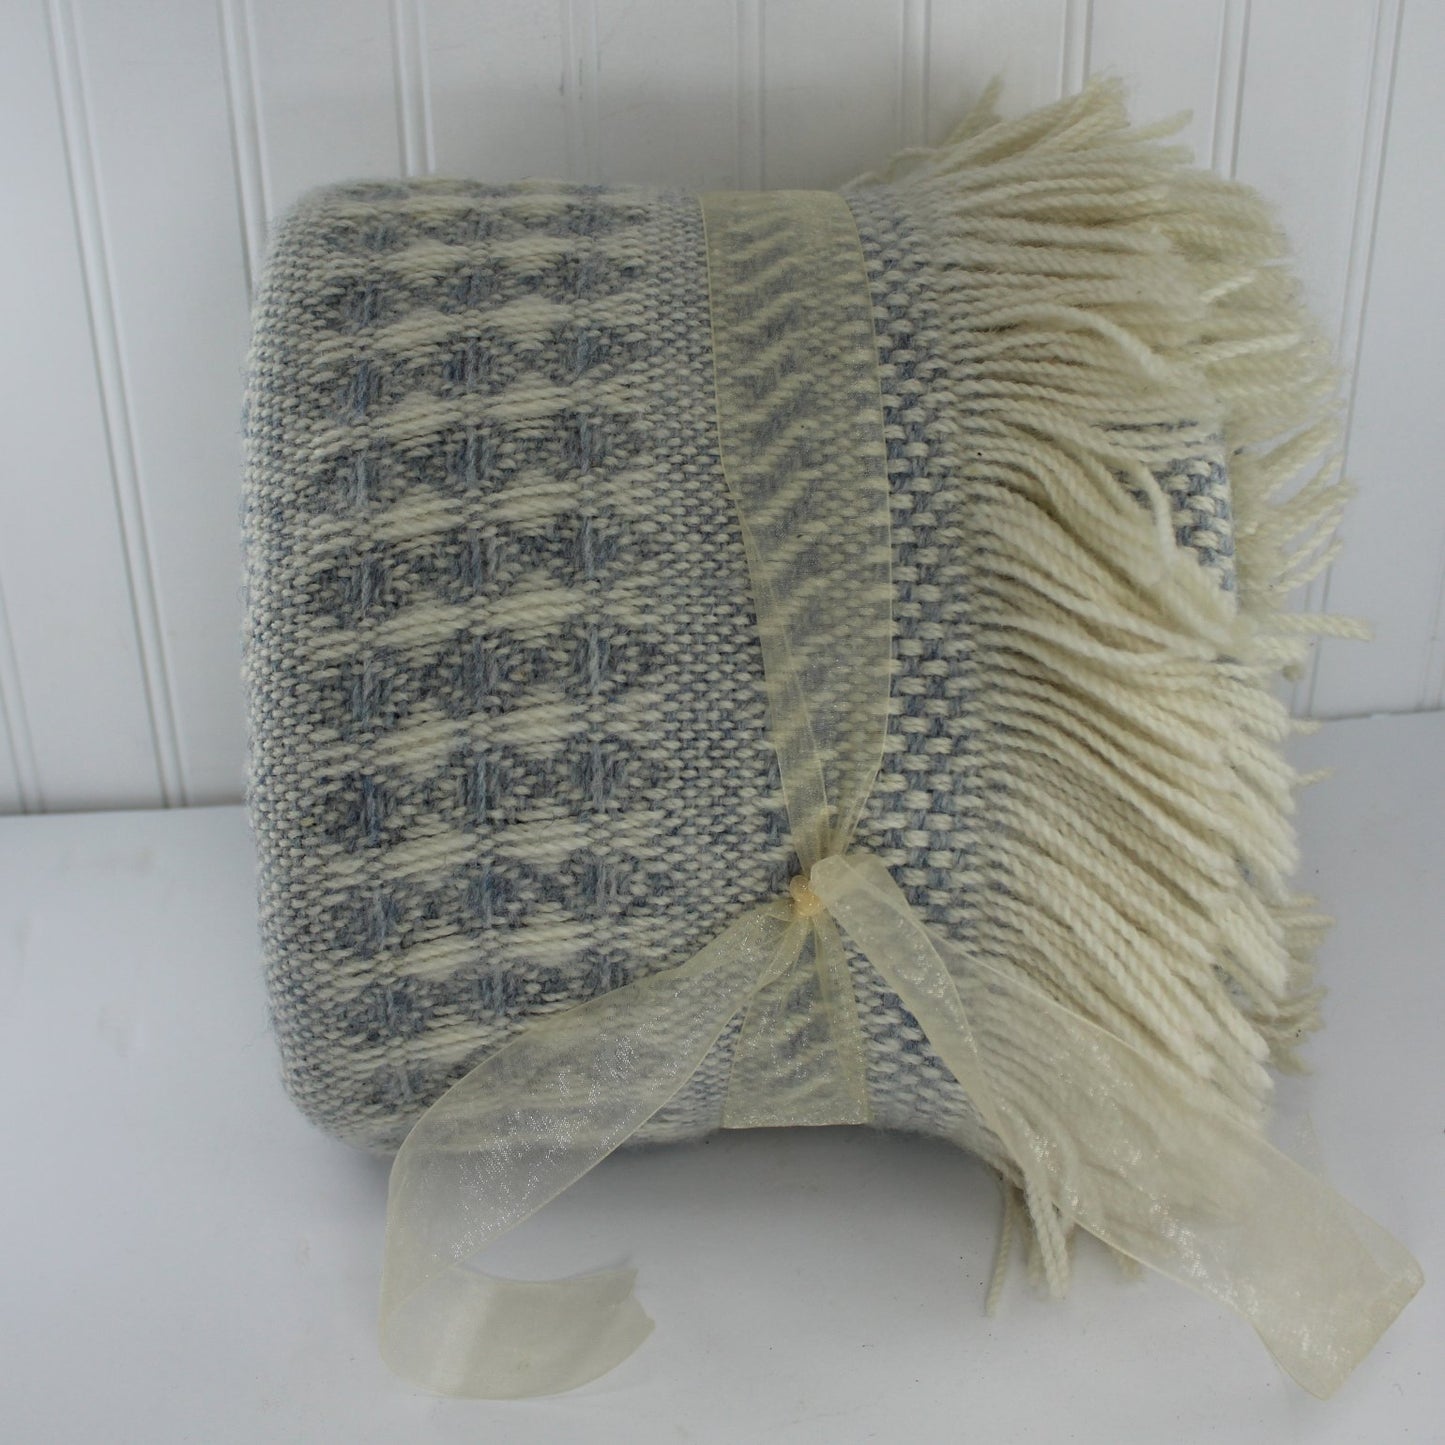 Pendleton Wool Throw Fringed Woven Design Blue Ivory great gift for yourself or other